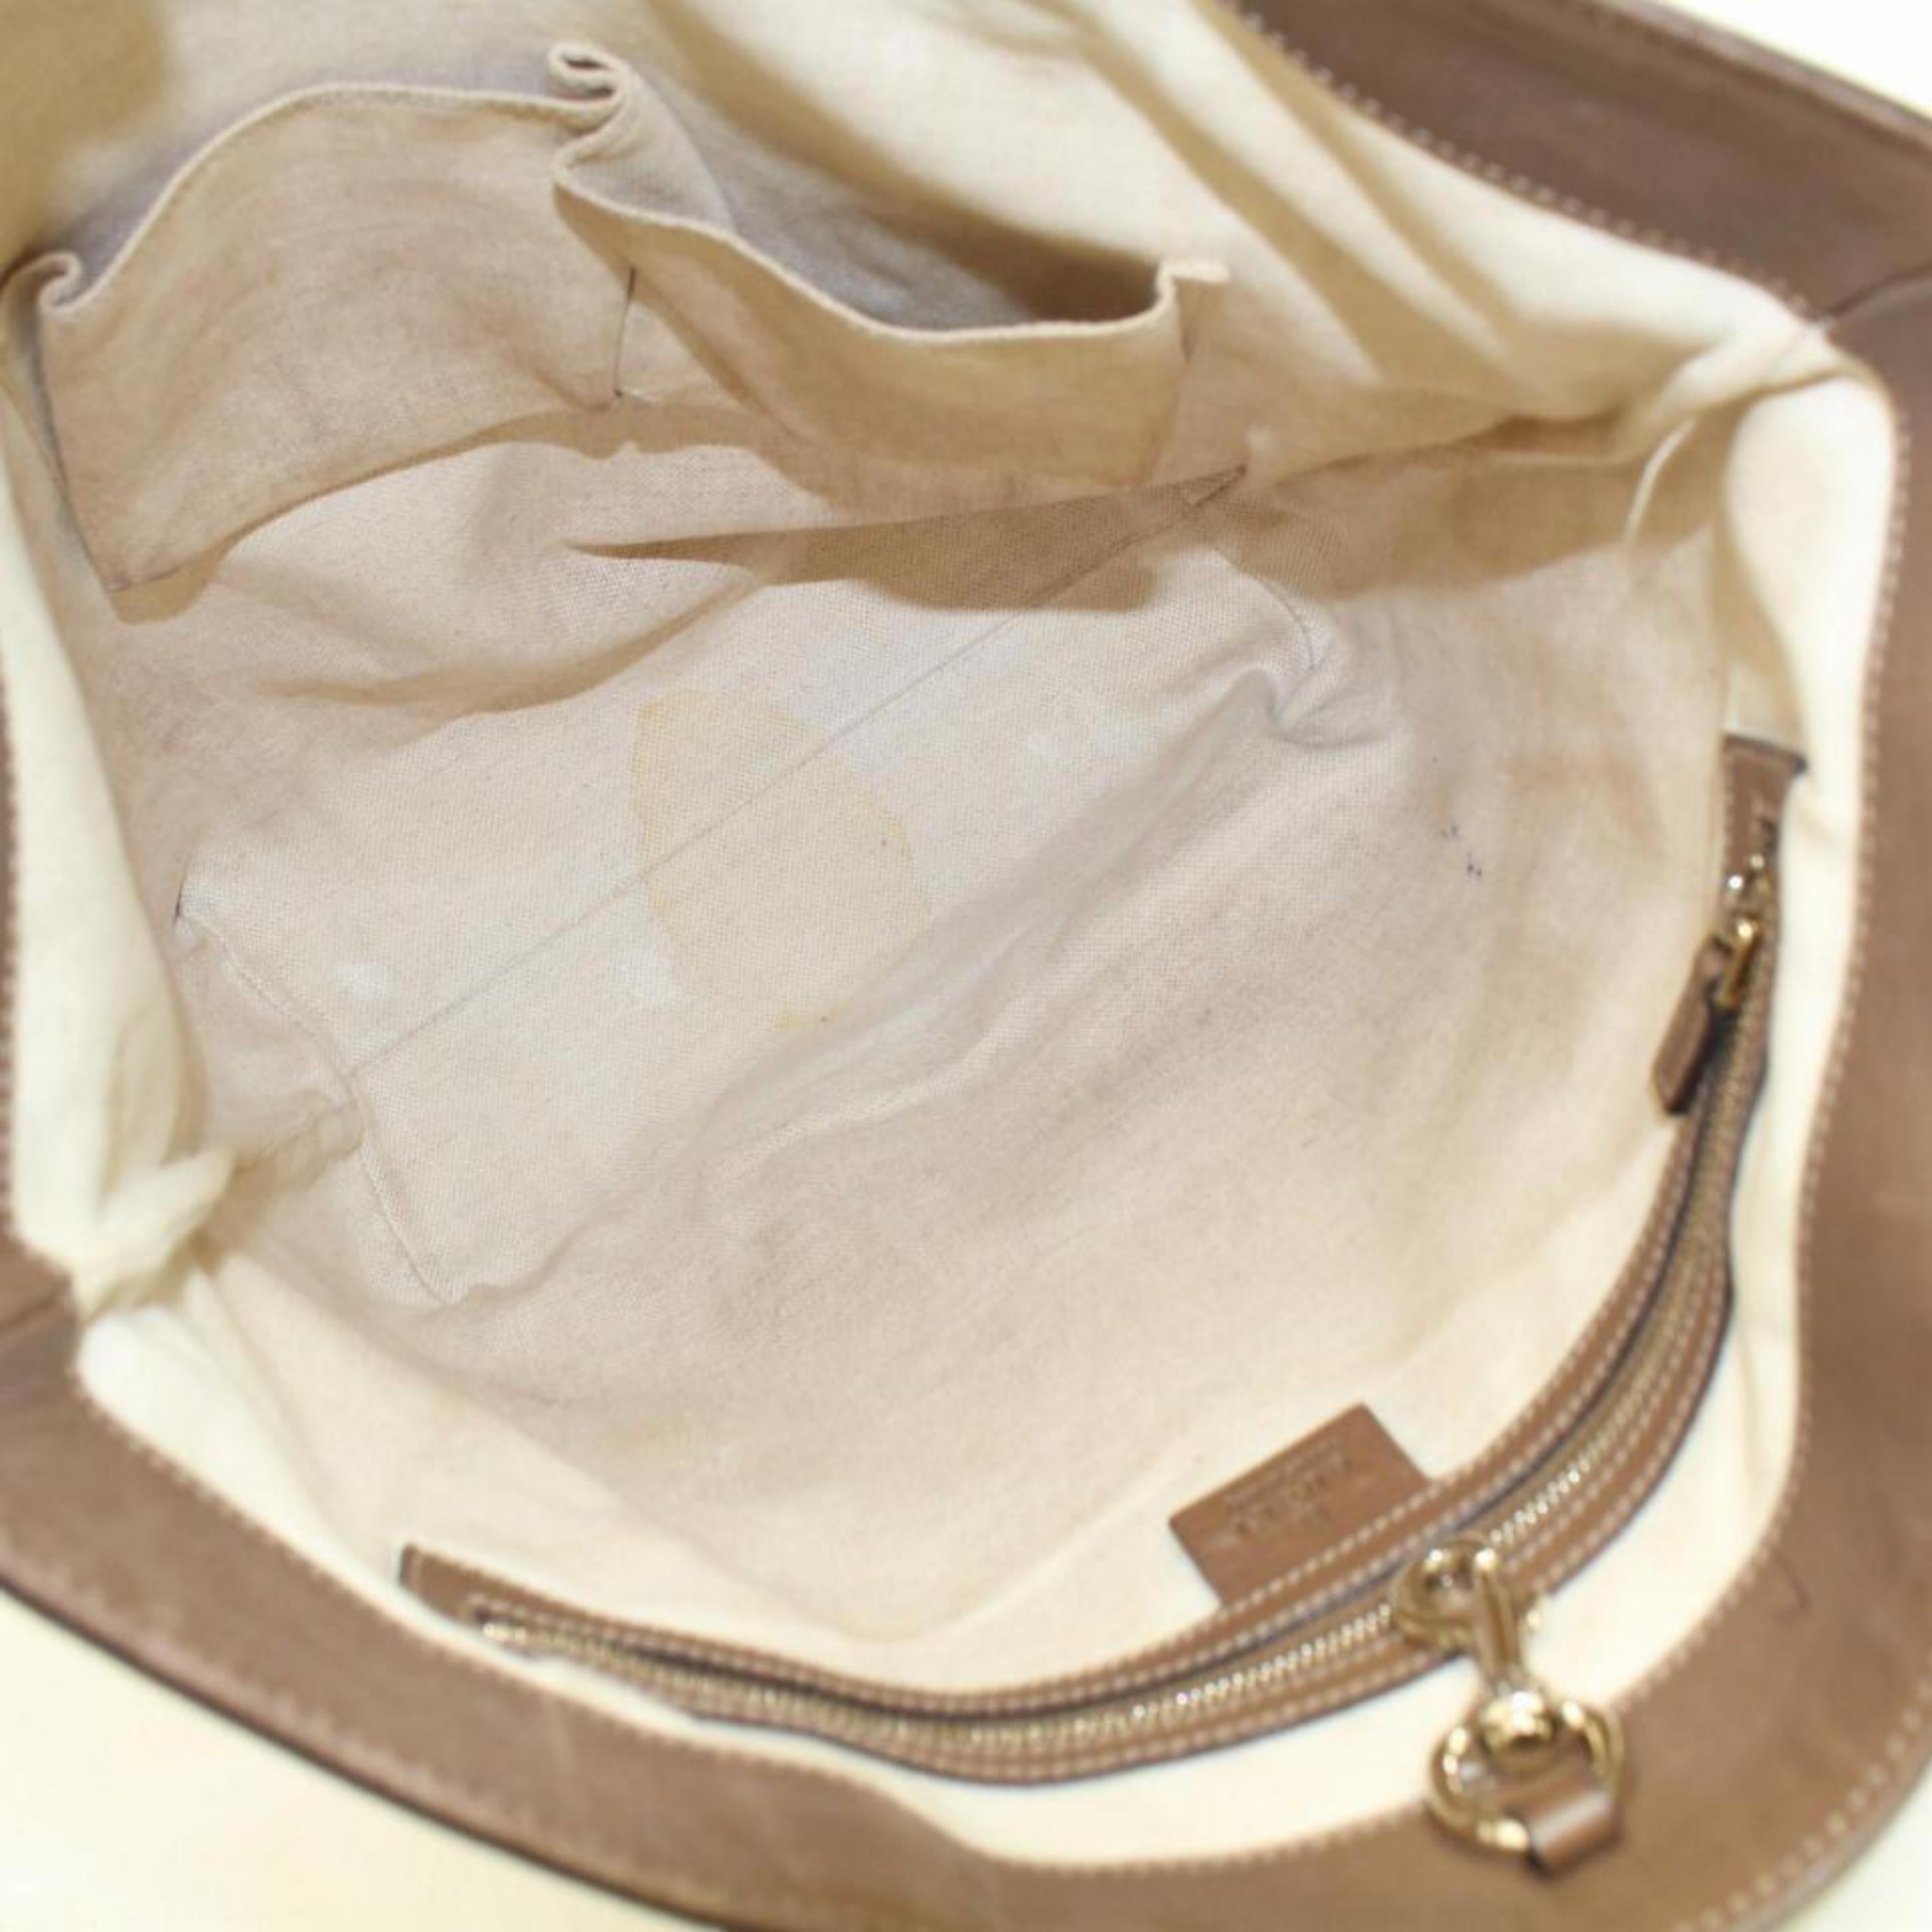 Gucci Monogram Gg Supreme Shopper 867846 Ivory Coated Canvas Tote In Good Condition For Sale In Forest Hills, NY